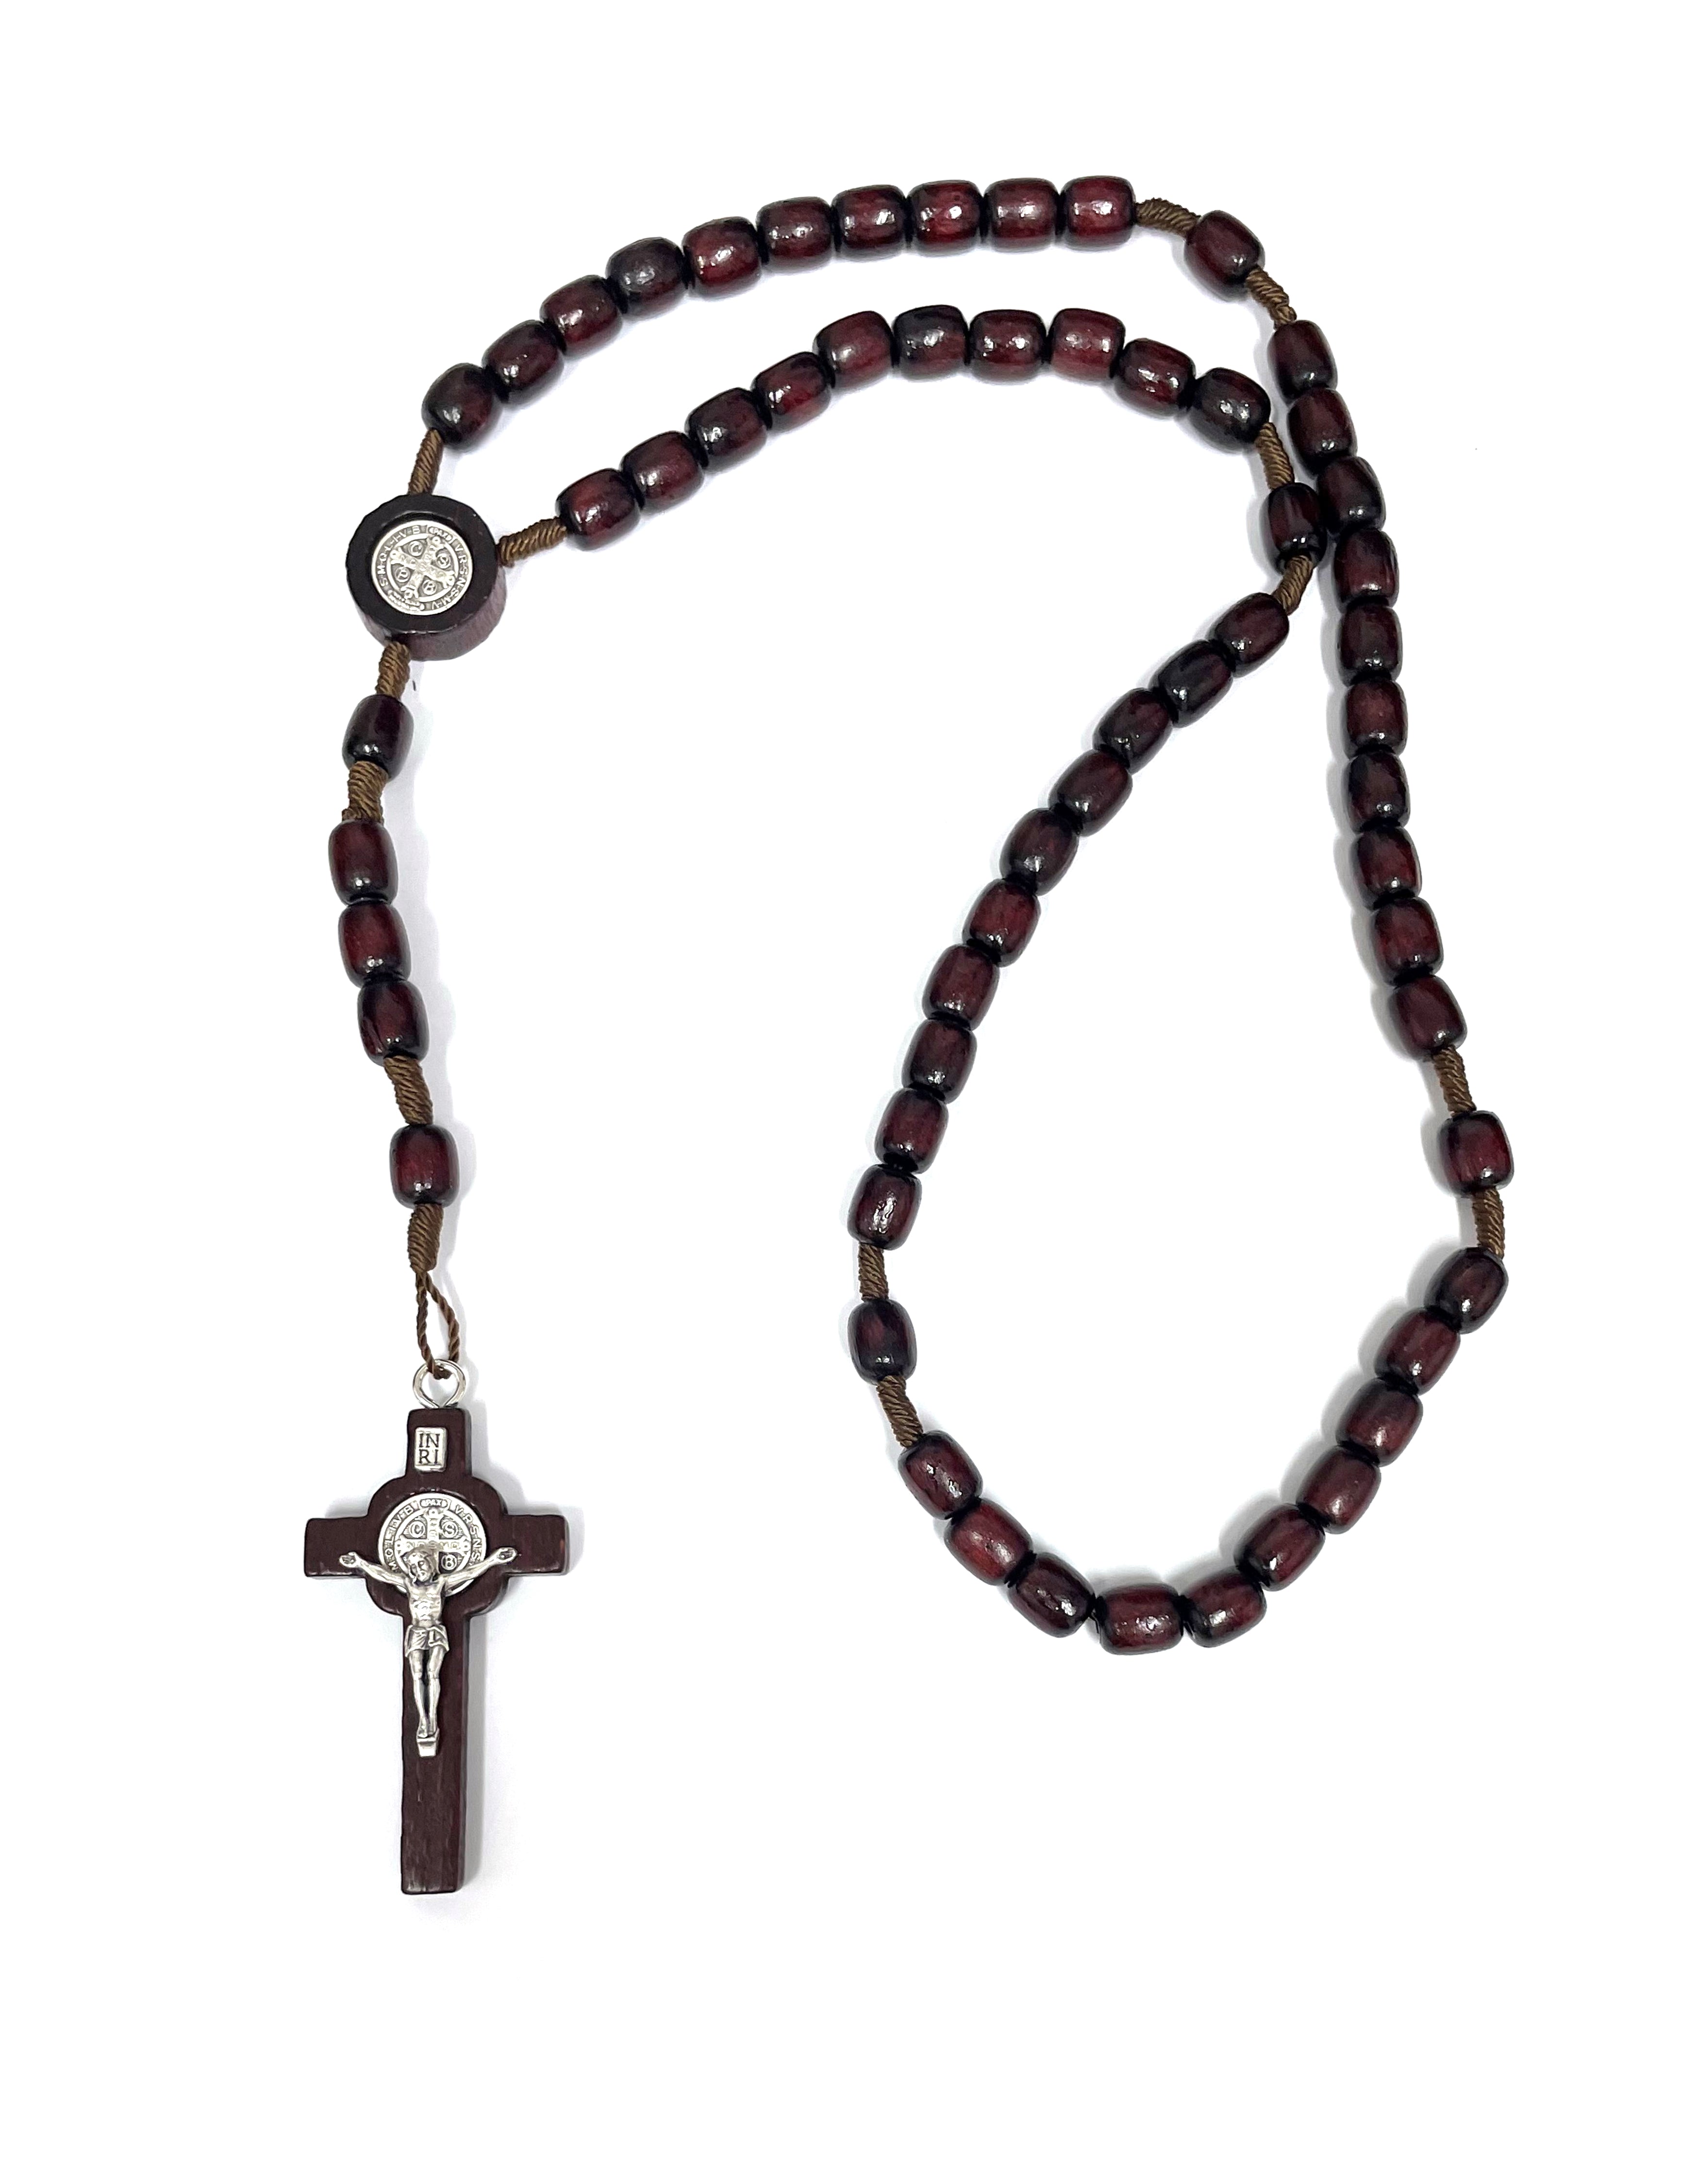 Saint Benedict wooden beads and cord rosary made Italy